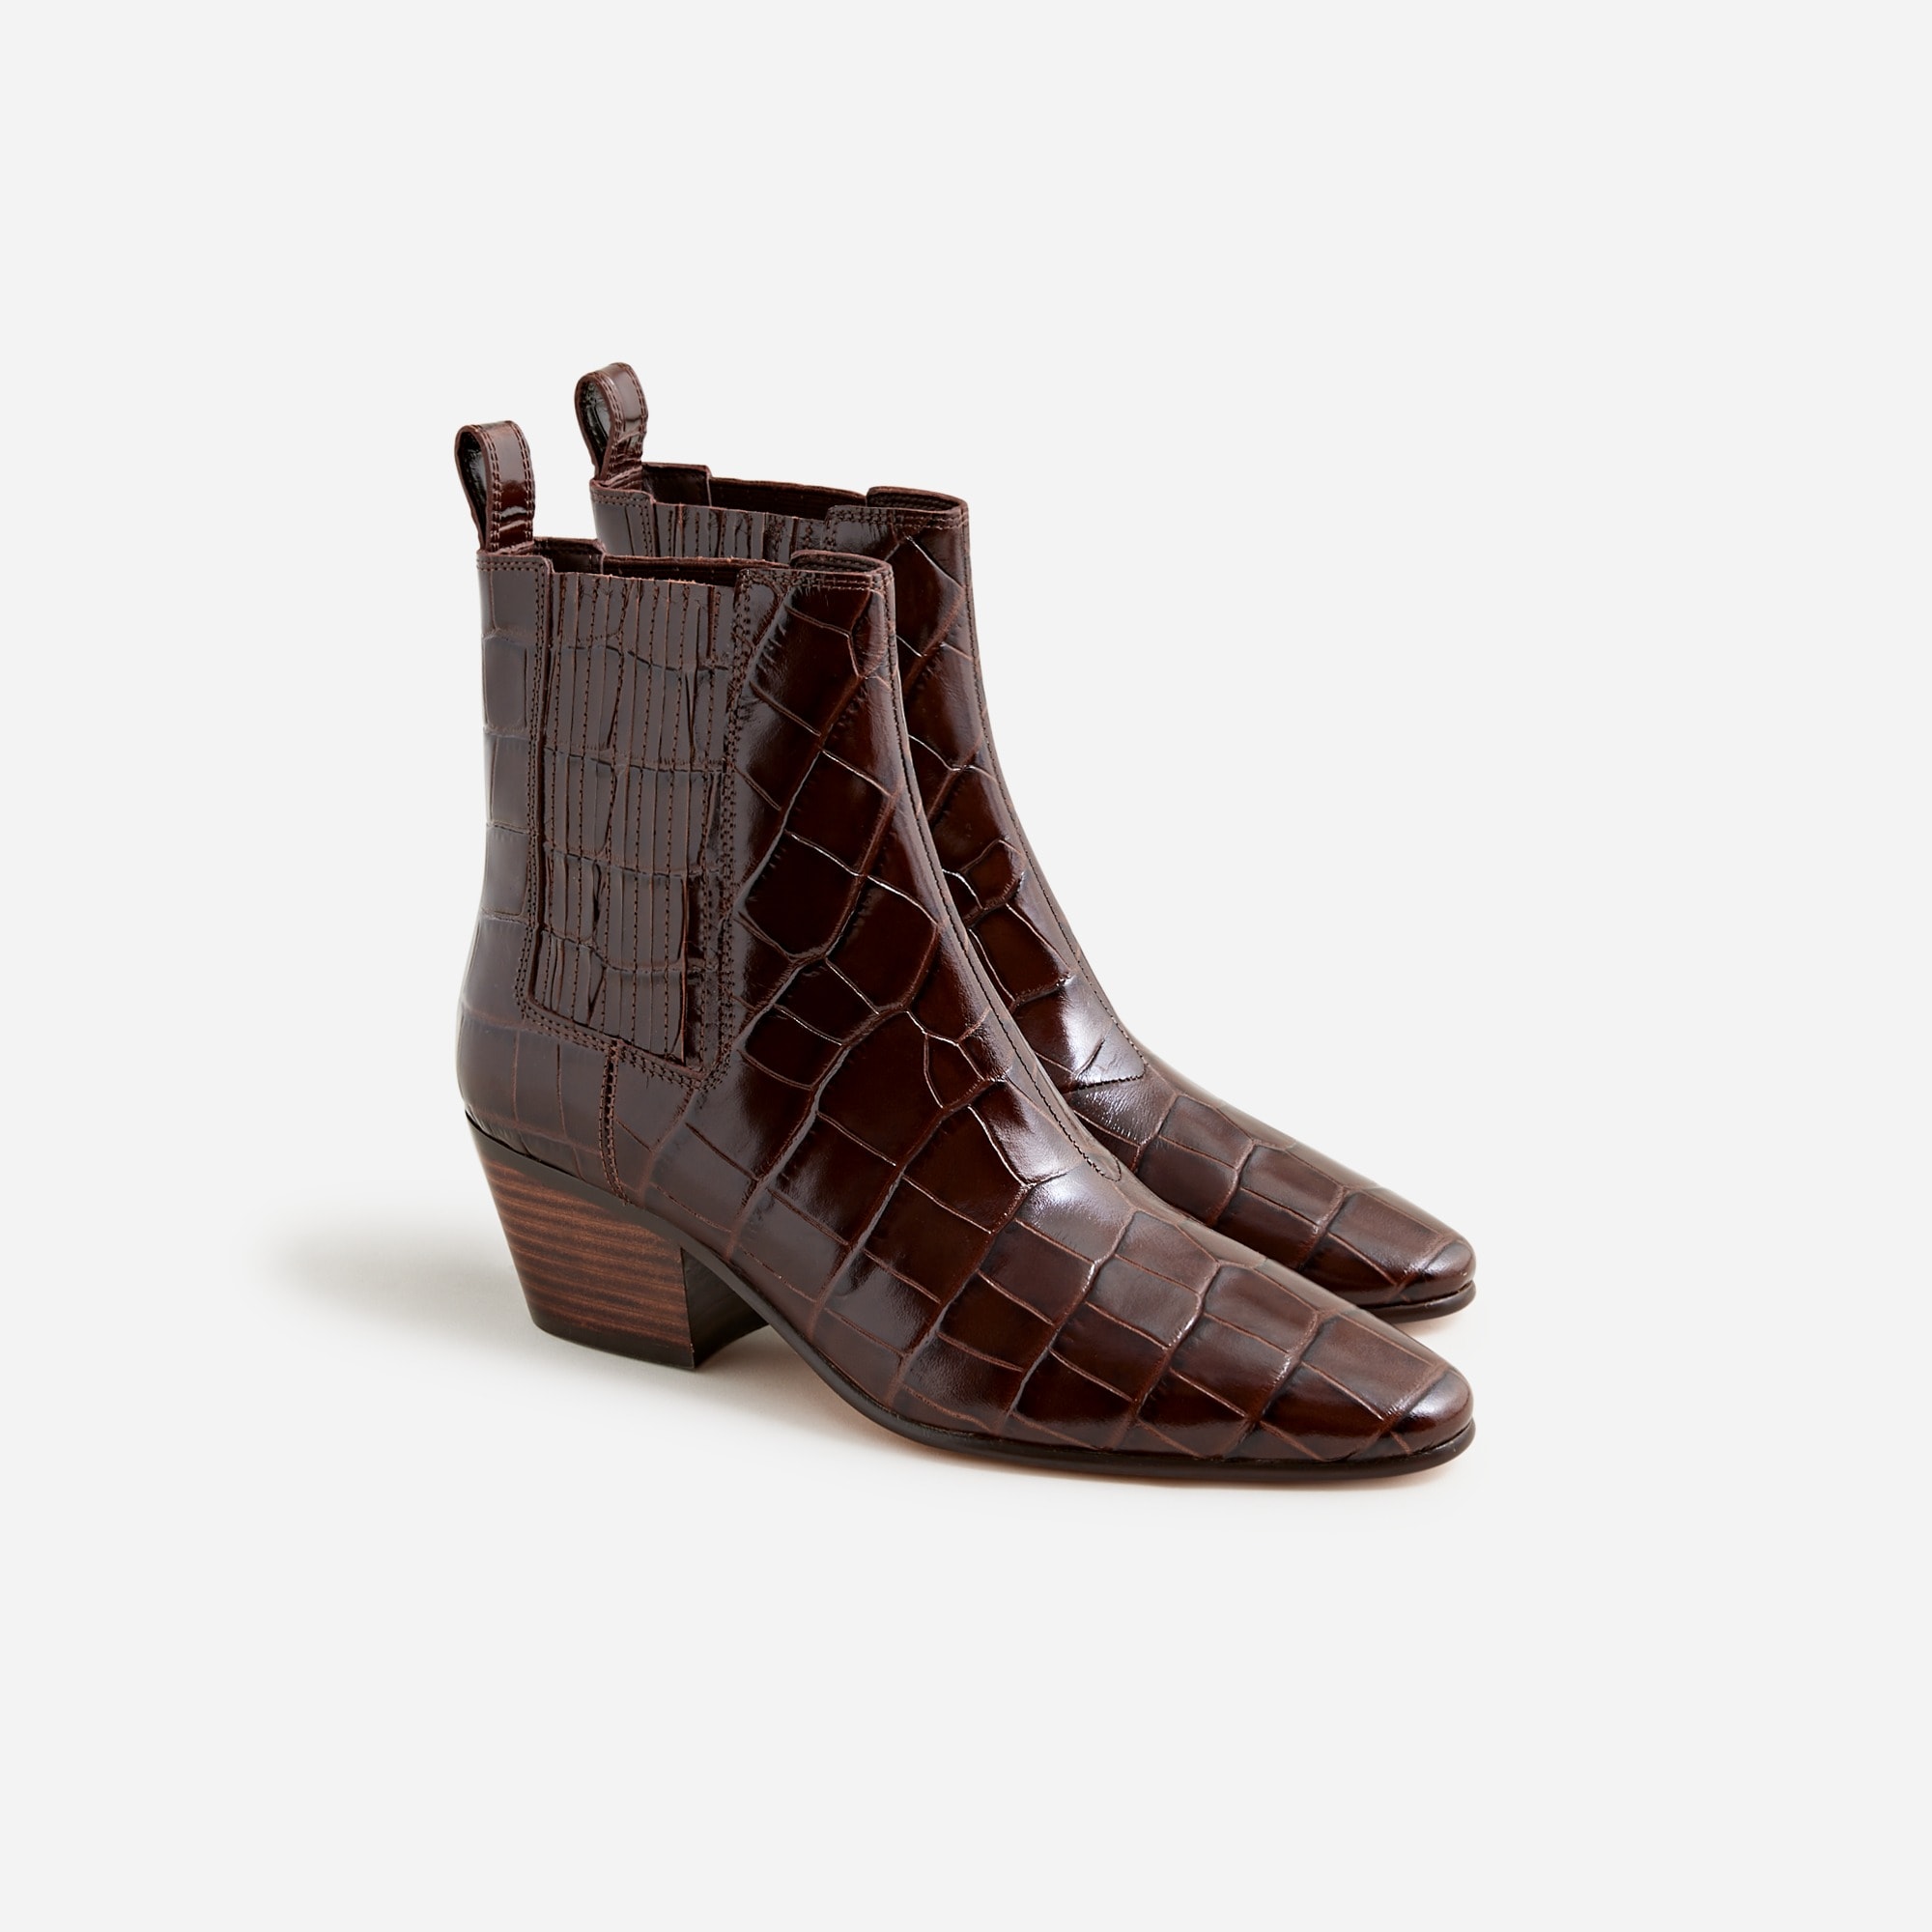  Piper ankle boots in Italian croc-embossed leather